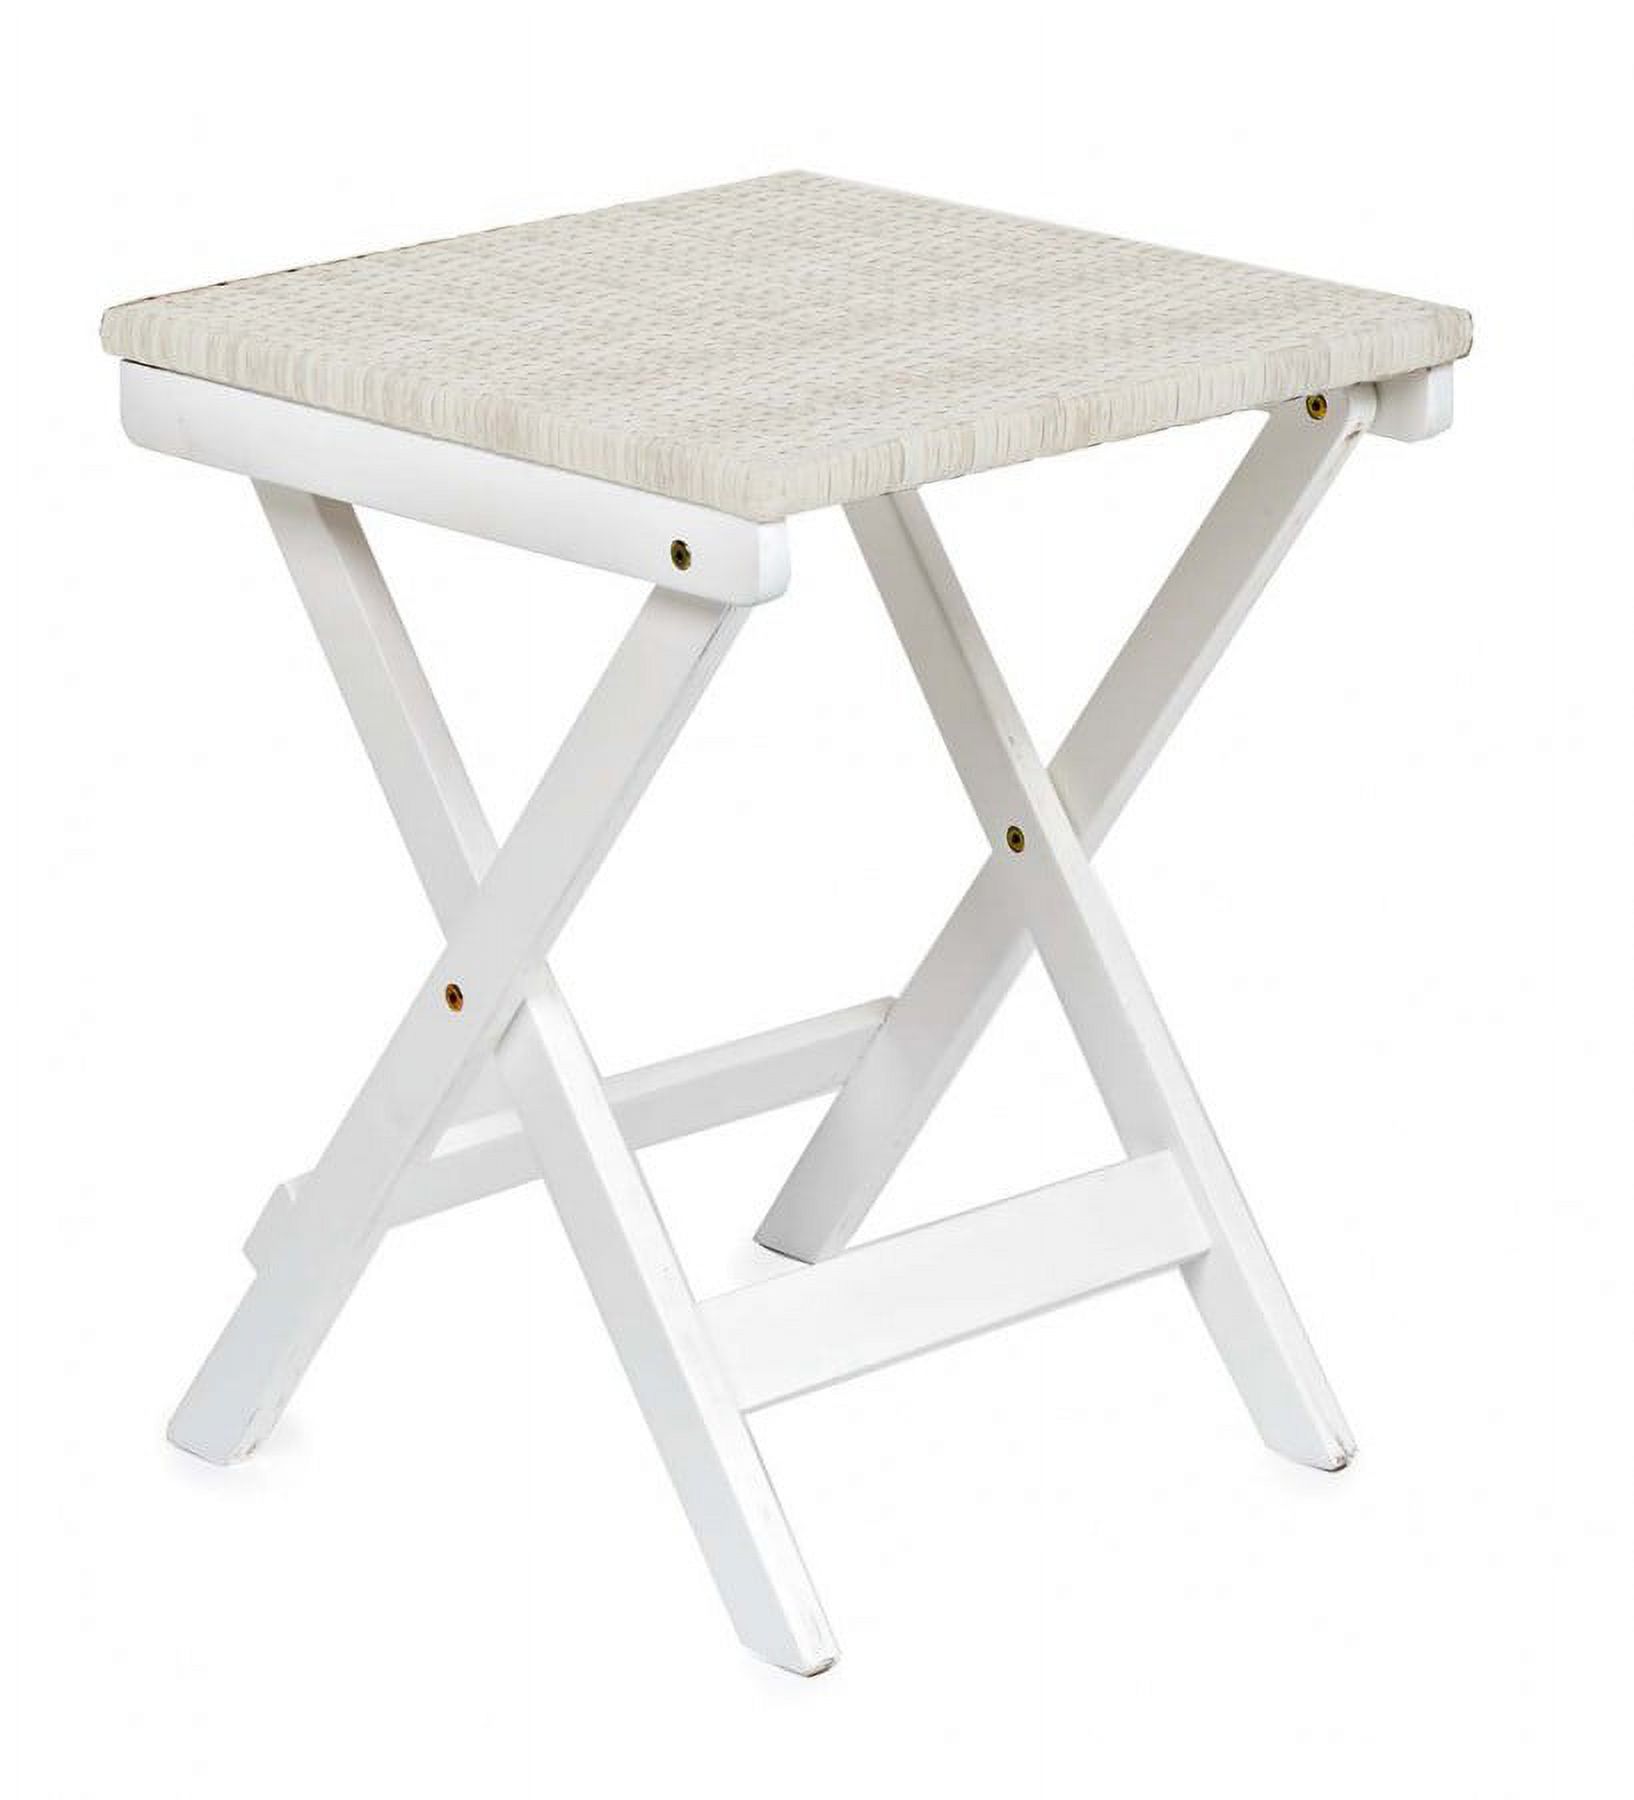 Plow & Hearth Claytor Folding Eucalyptus Outdoor Side Table Ivory - image 1 of 1